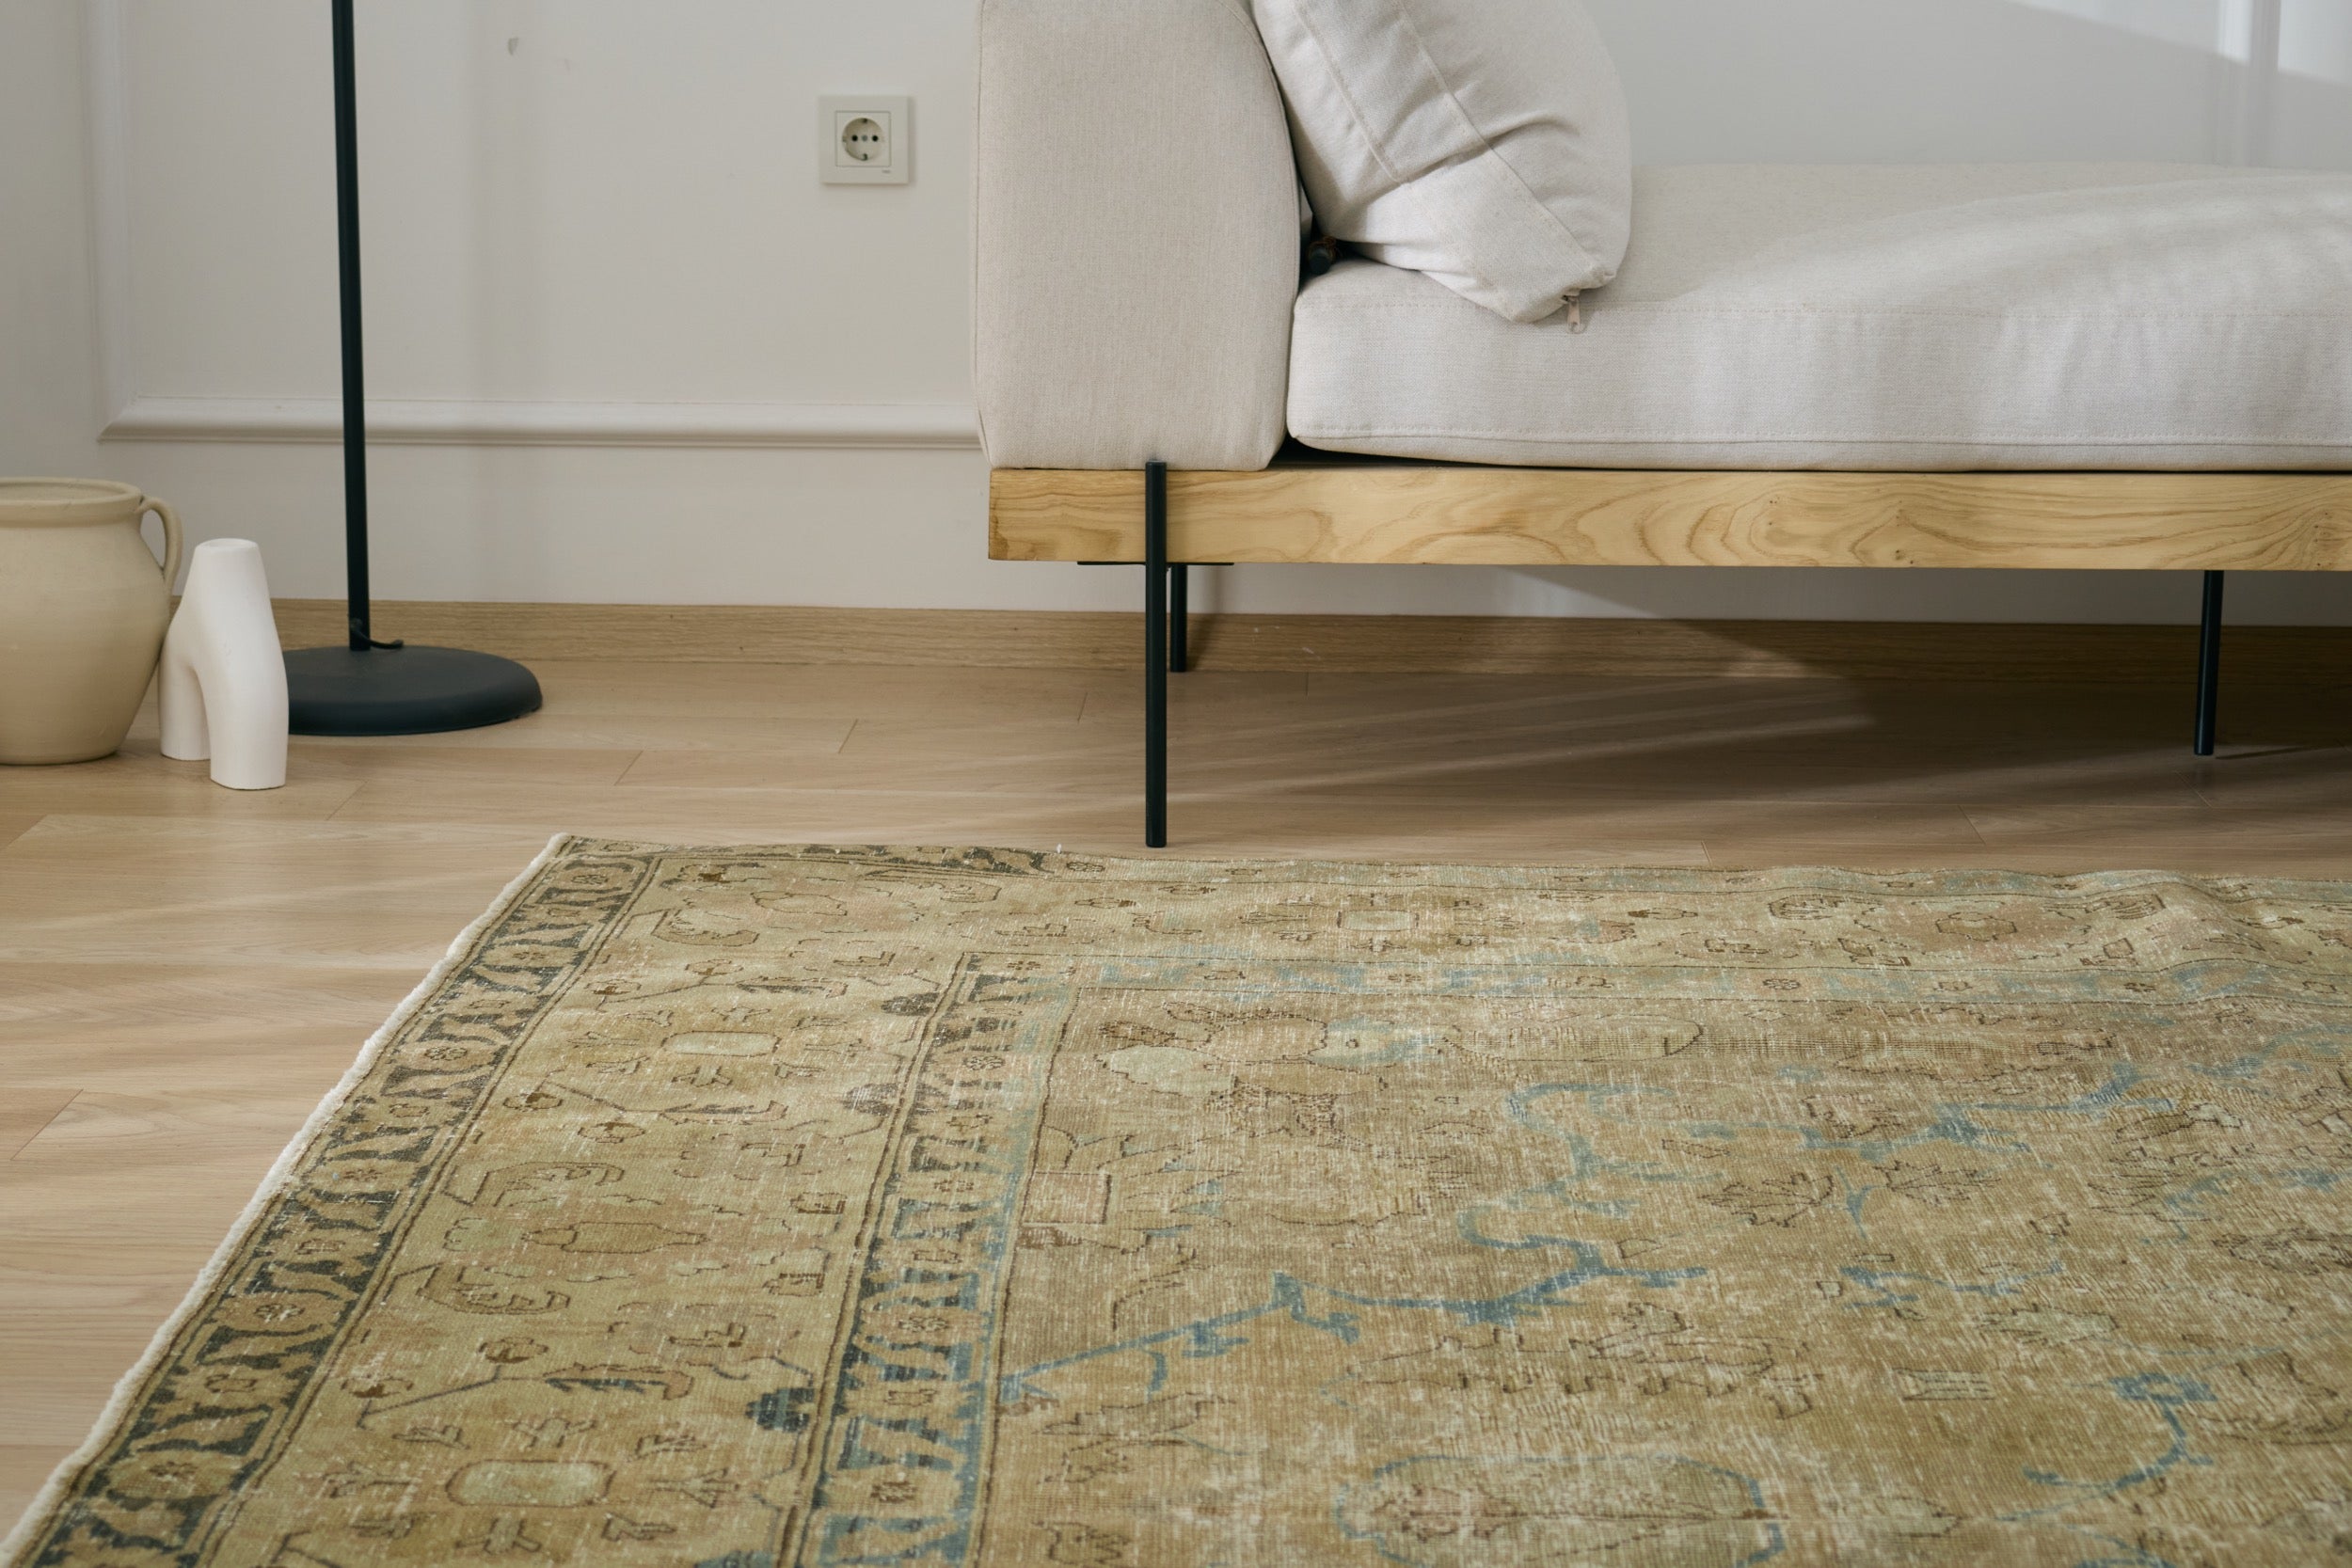 Torry - Weaving History into Homes | Kuden Rugs